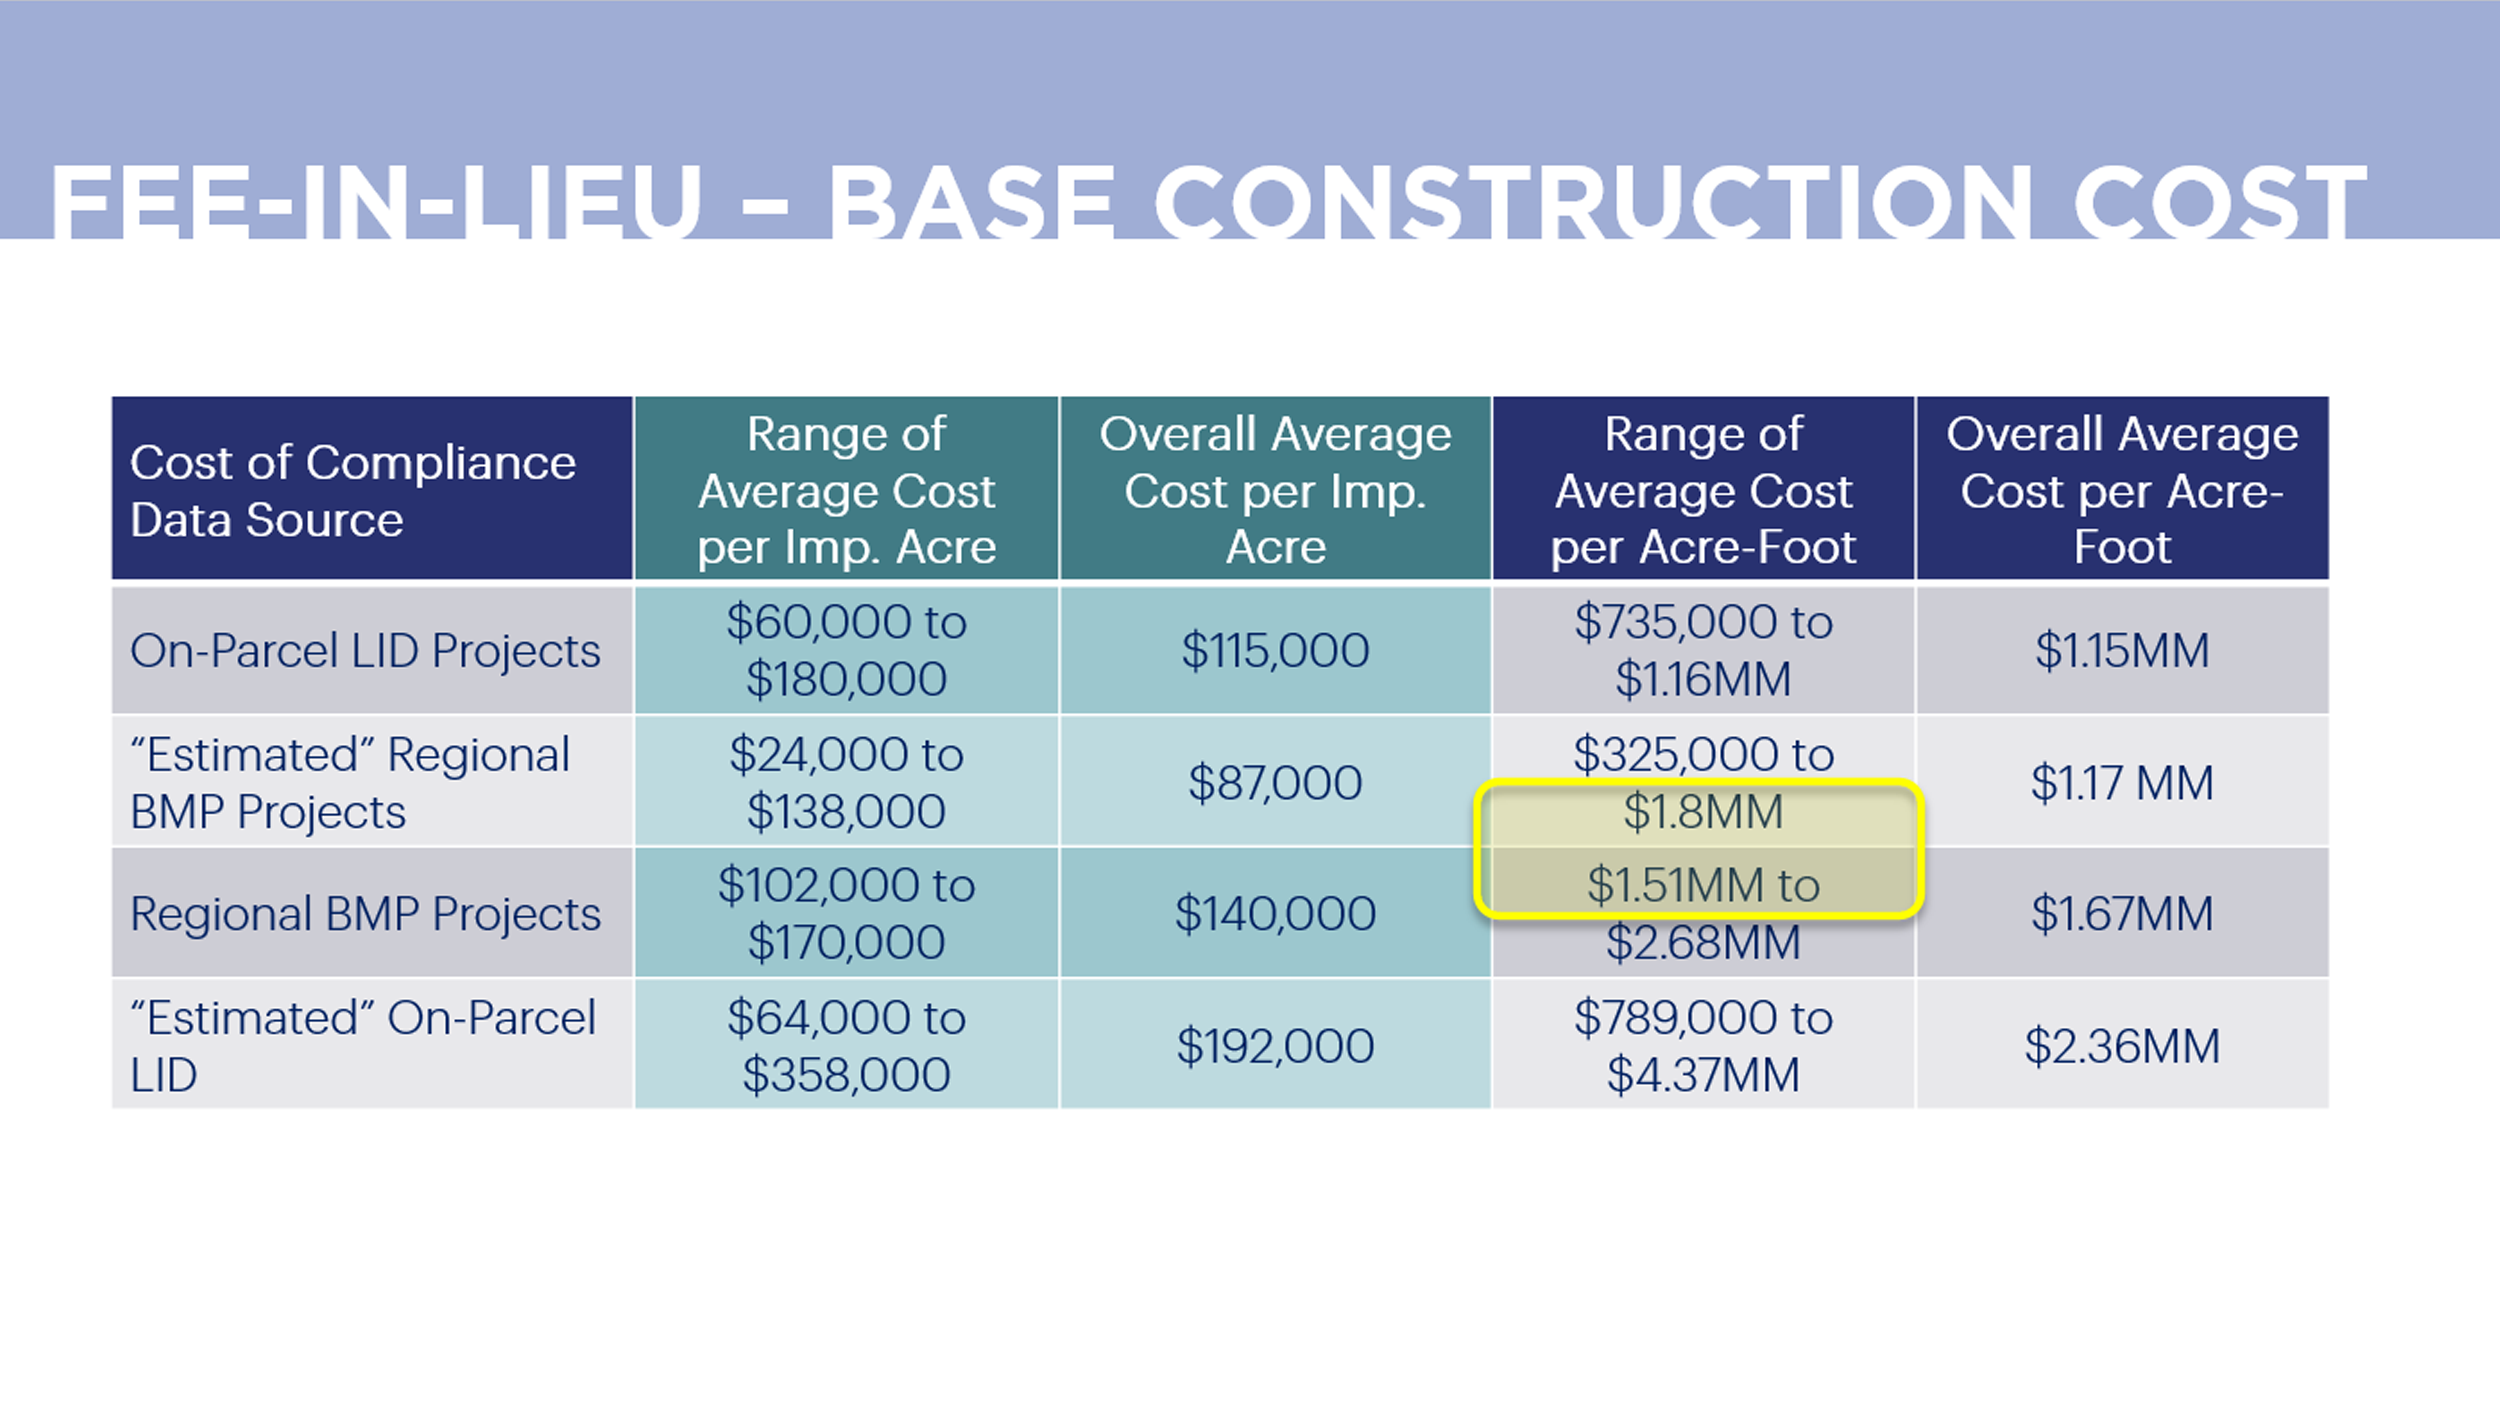 fee-in-lieu summary of construction cost analysis